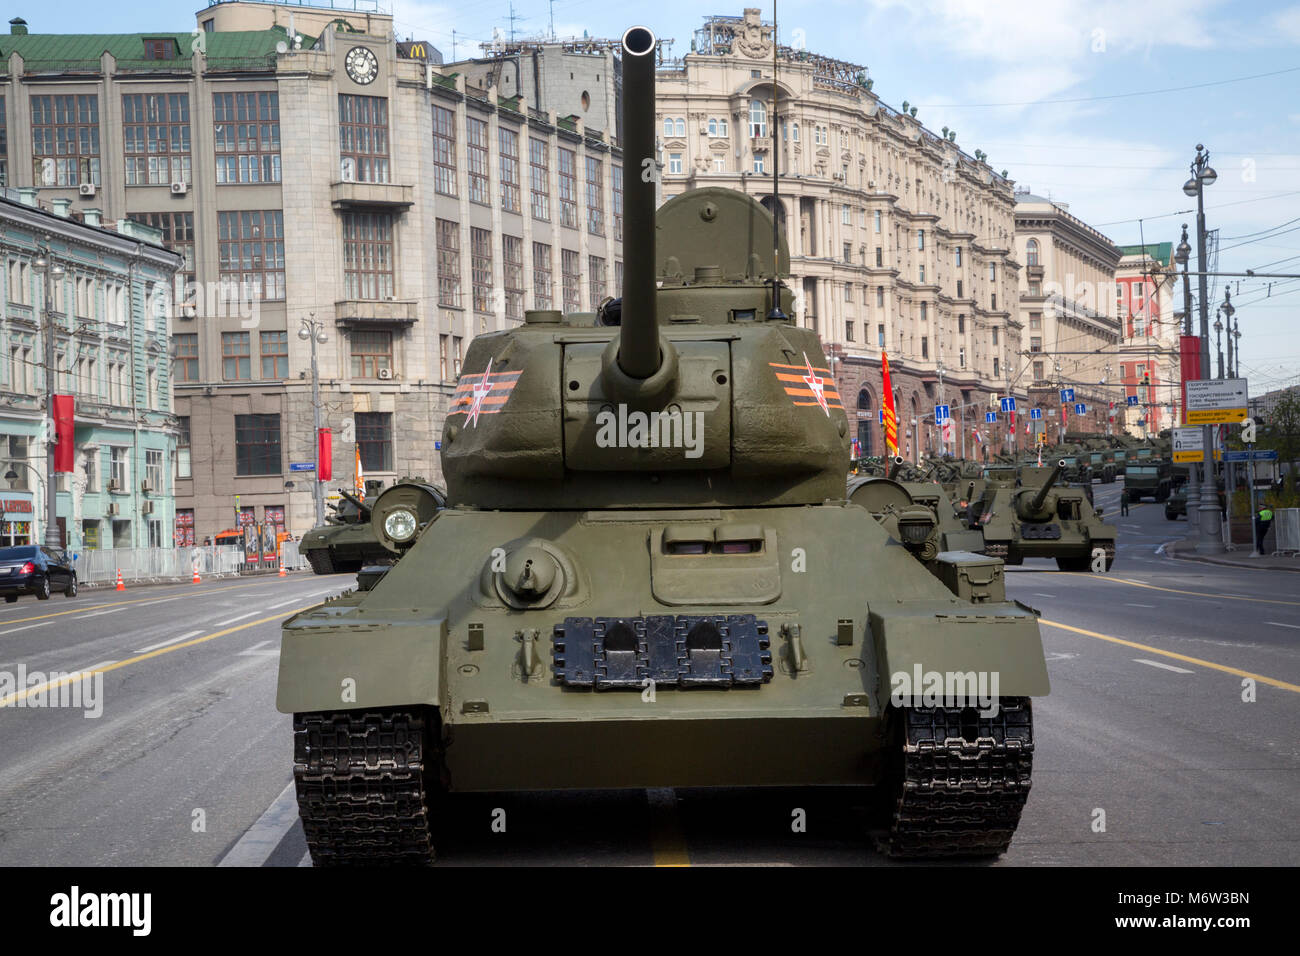 Tanks T-34-85 before start Victory Day military parade on Moscow's Red Square marking the 70th anniversary of the Victory over Nazi Germany in the Gre Stock Photo